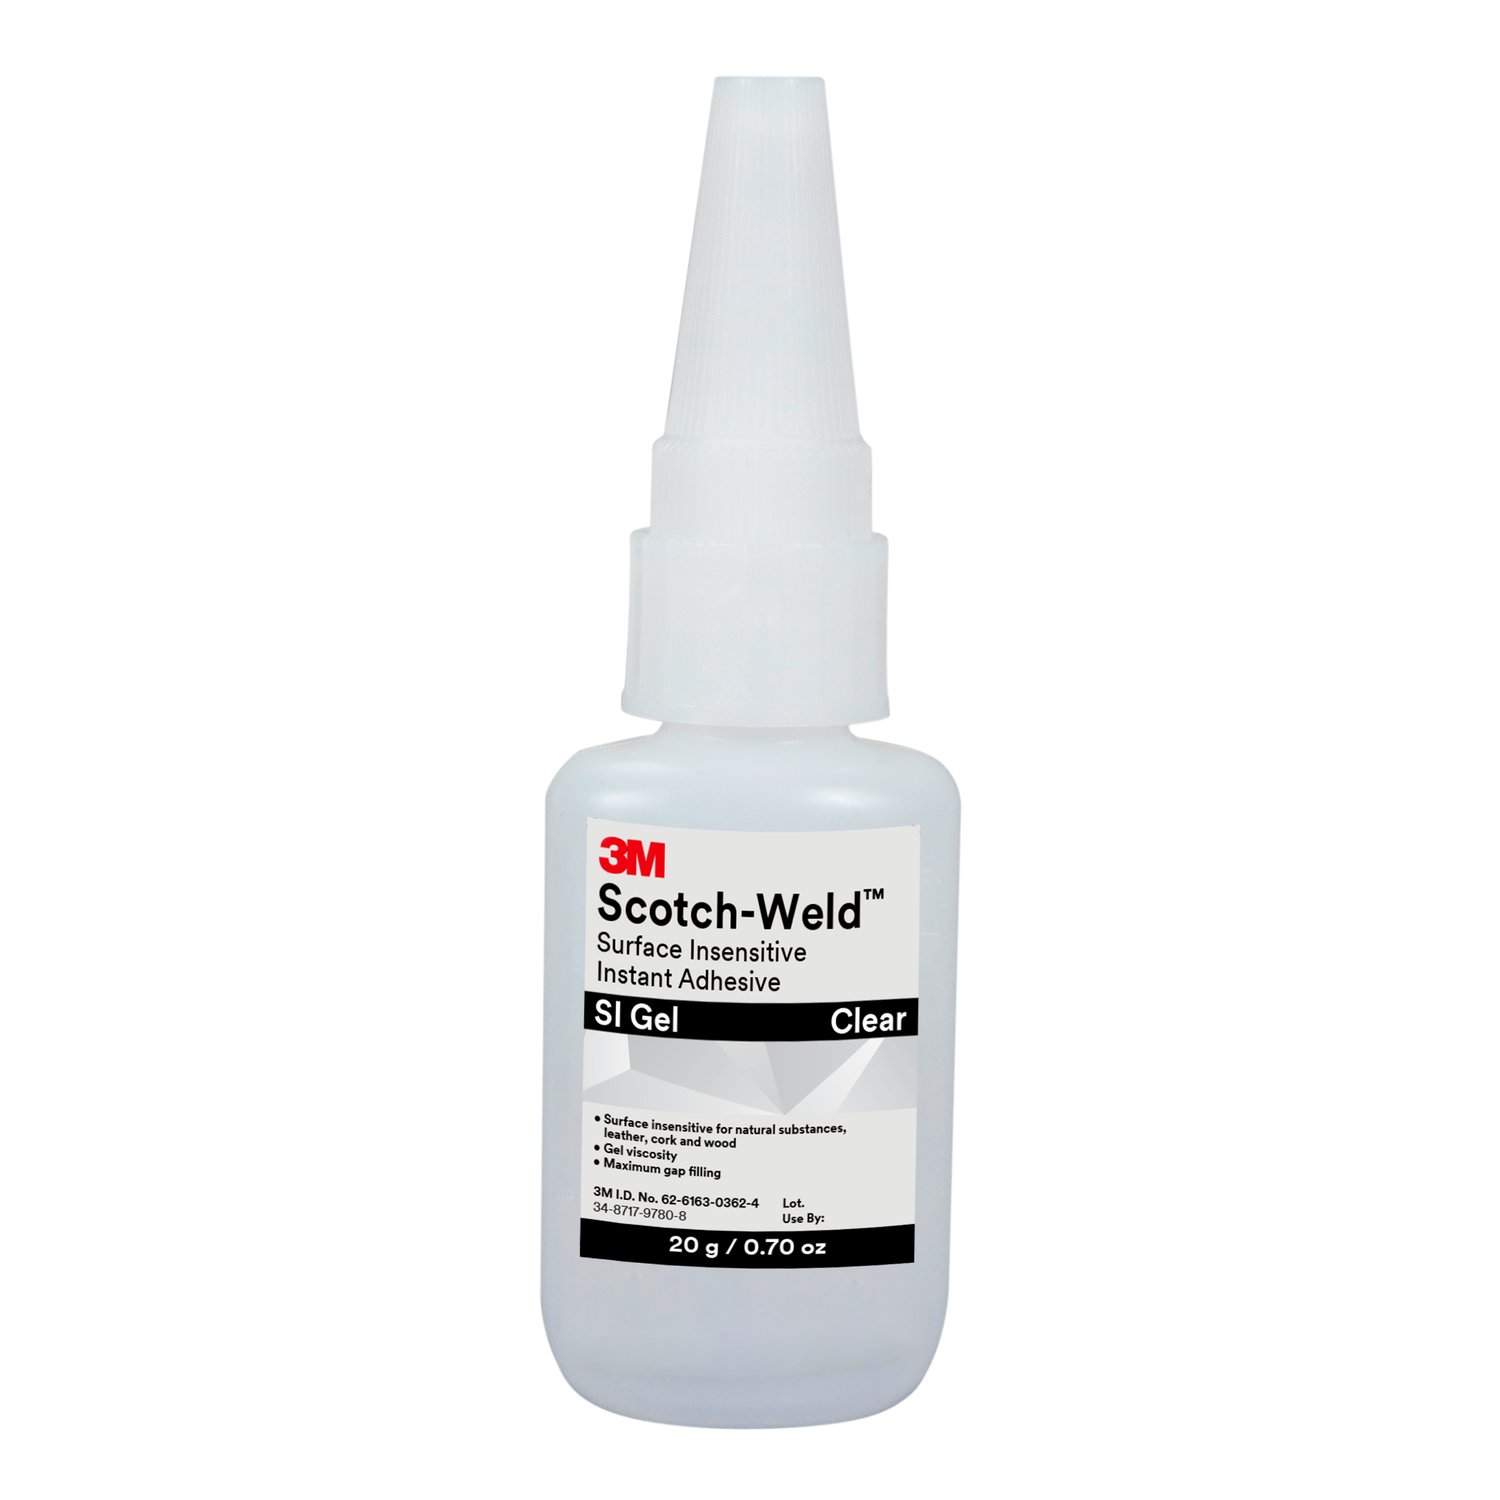 7100039258 - 3M Scotch-Weld Surface Insensitive Instant Adhesive SI Gel, Clear, 20
Gram, 10/Case